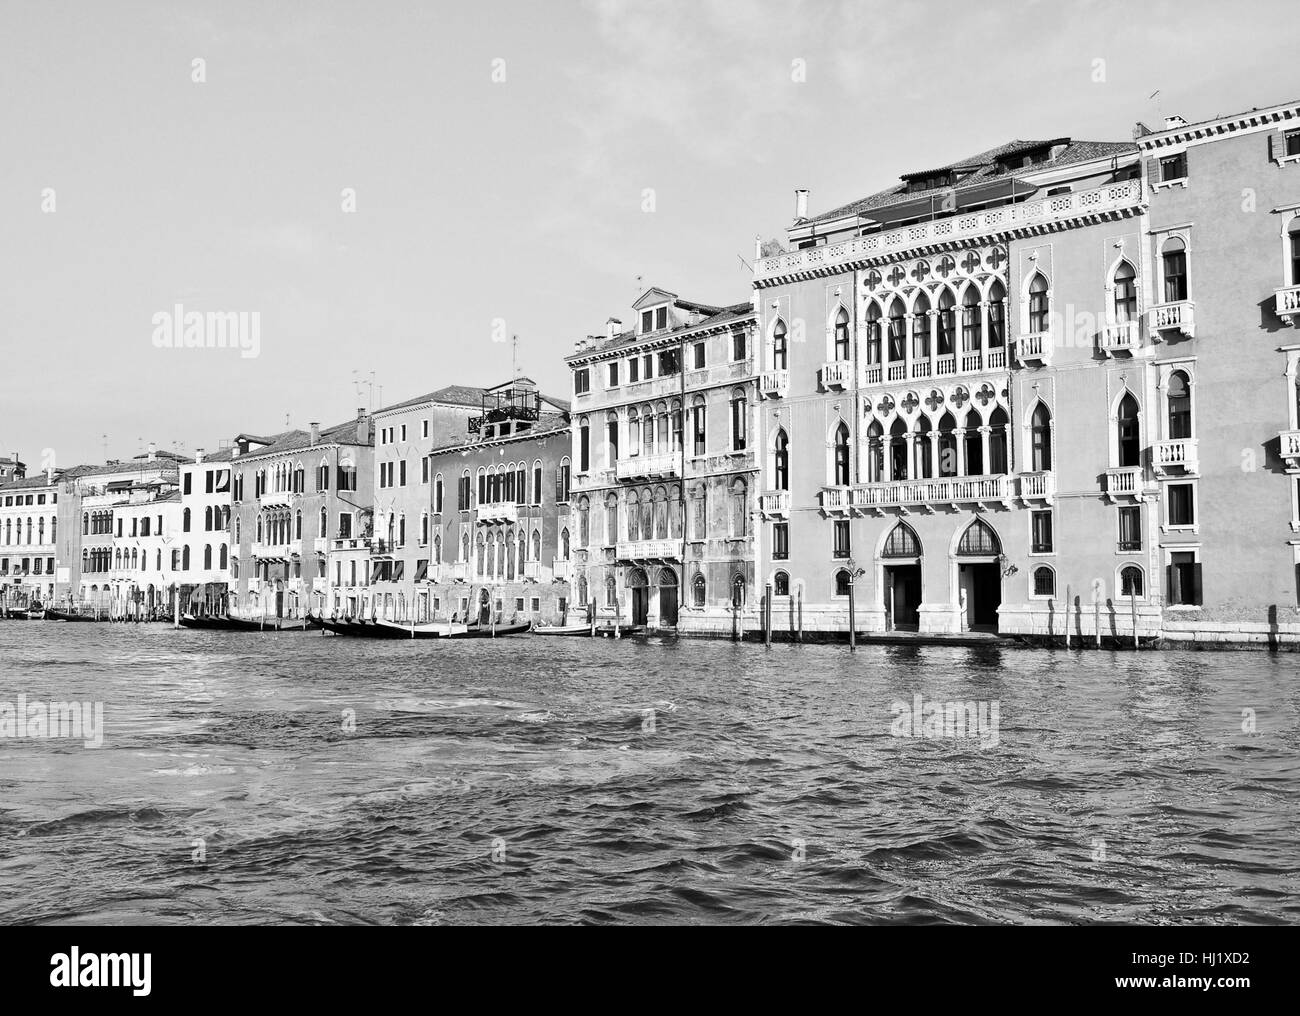 View of the city of Venice (Venezia) from the Grand Canal Stock Photo